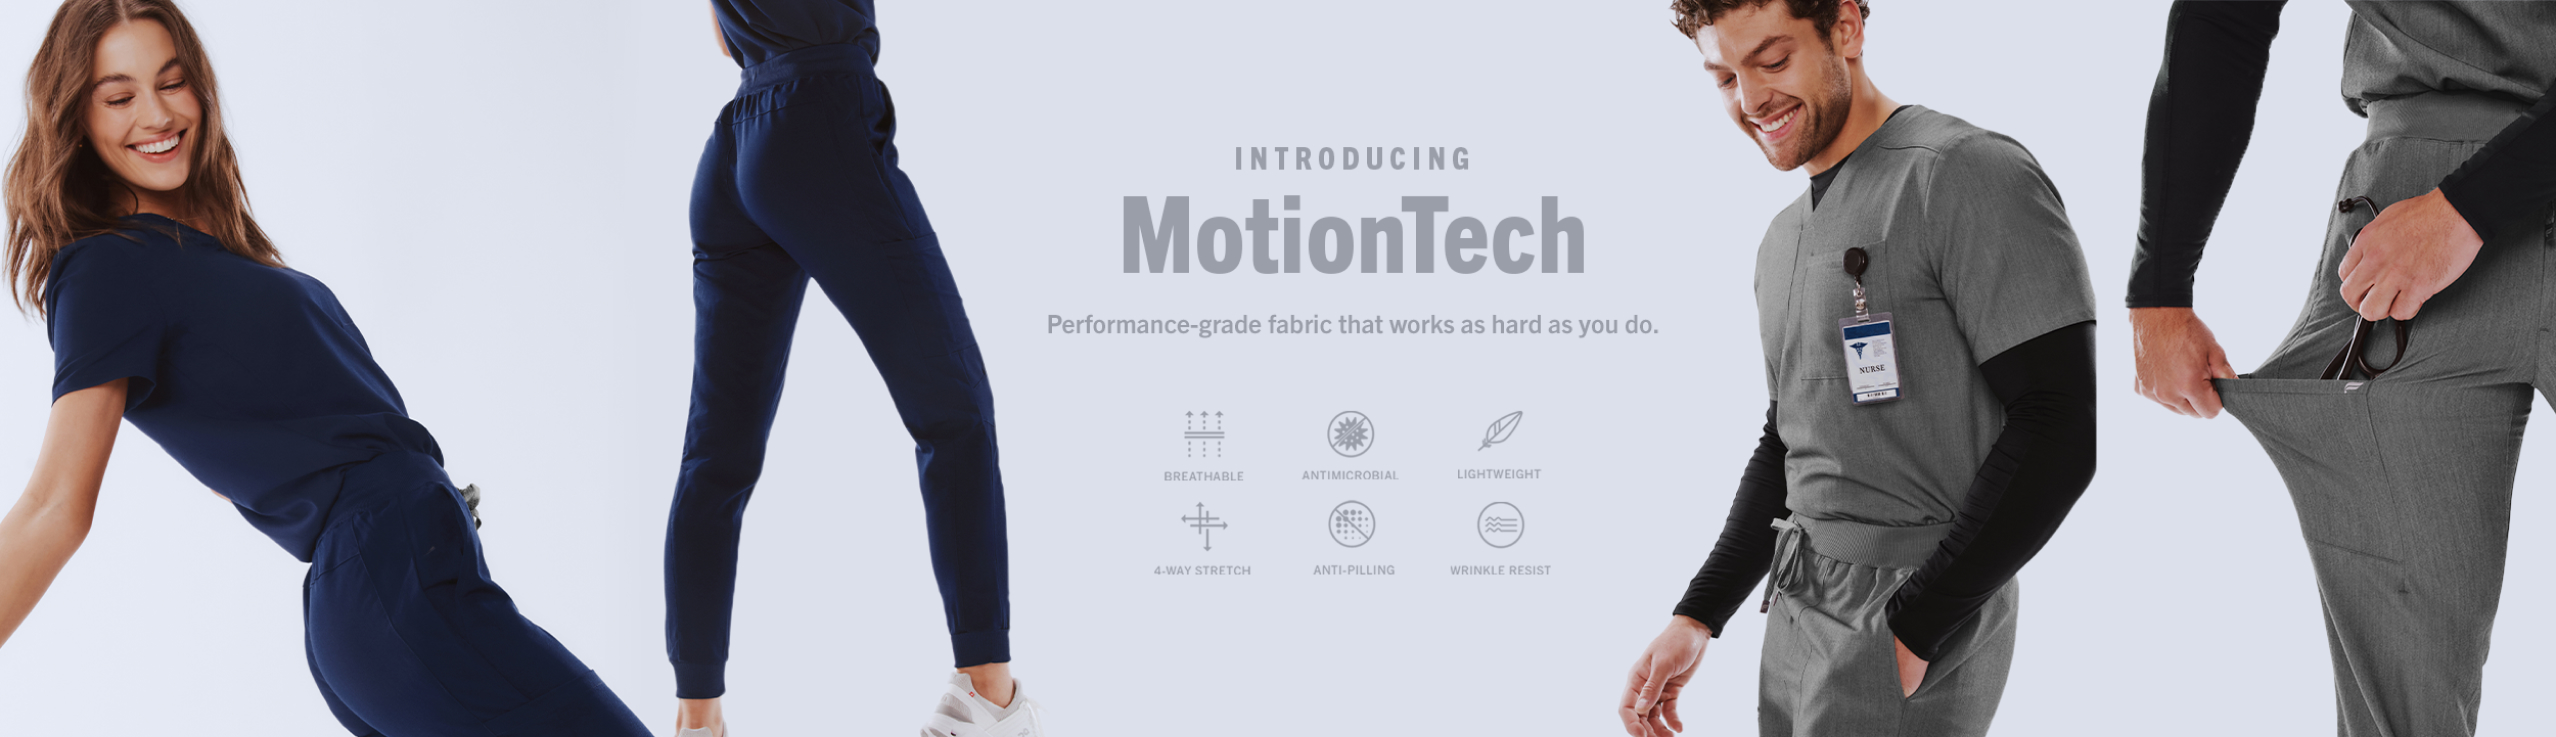 Introducing MotionTech, performance-grade fabric that works as hard as you do. Shop now.